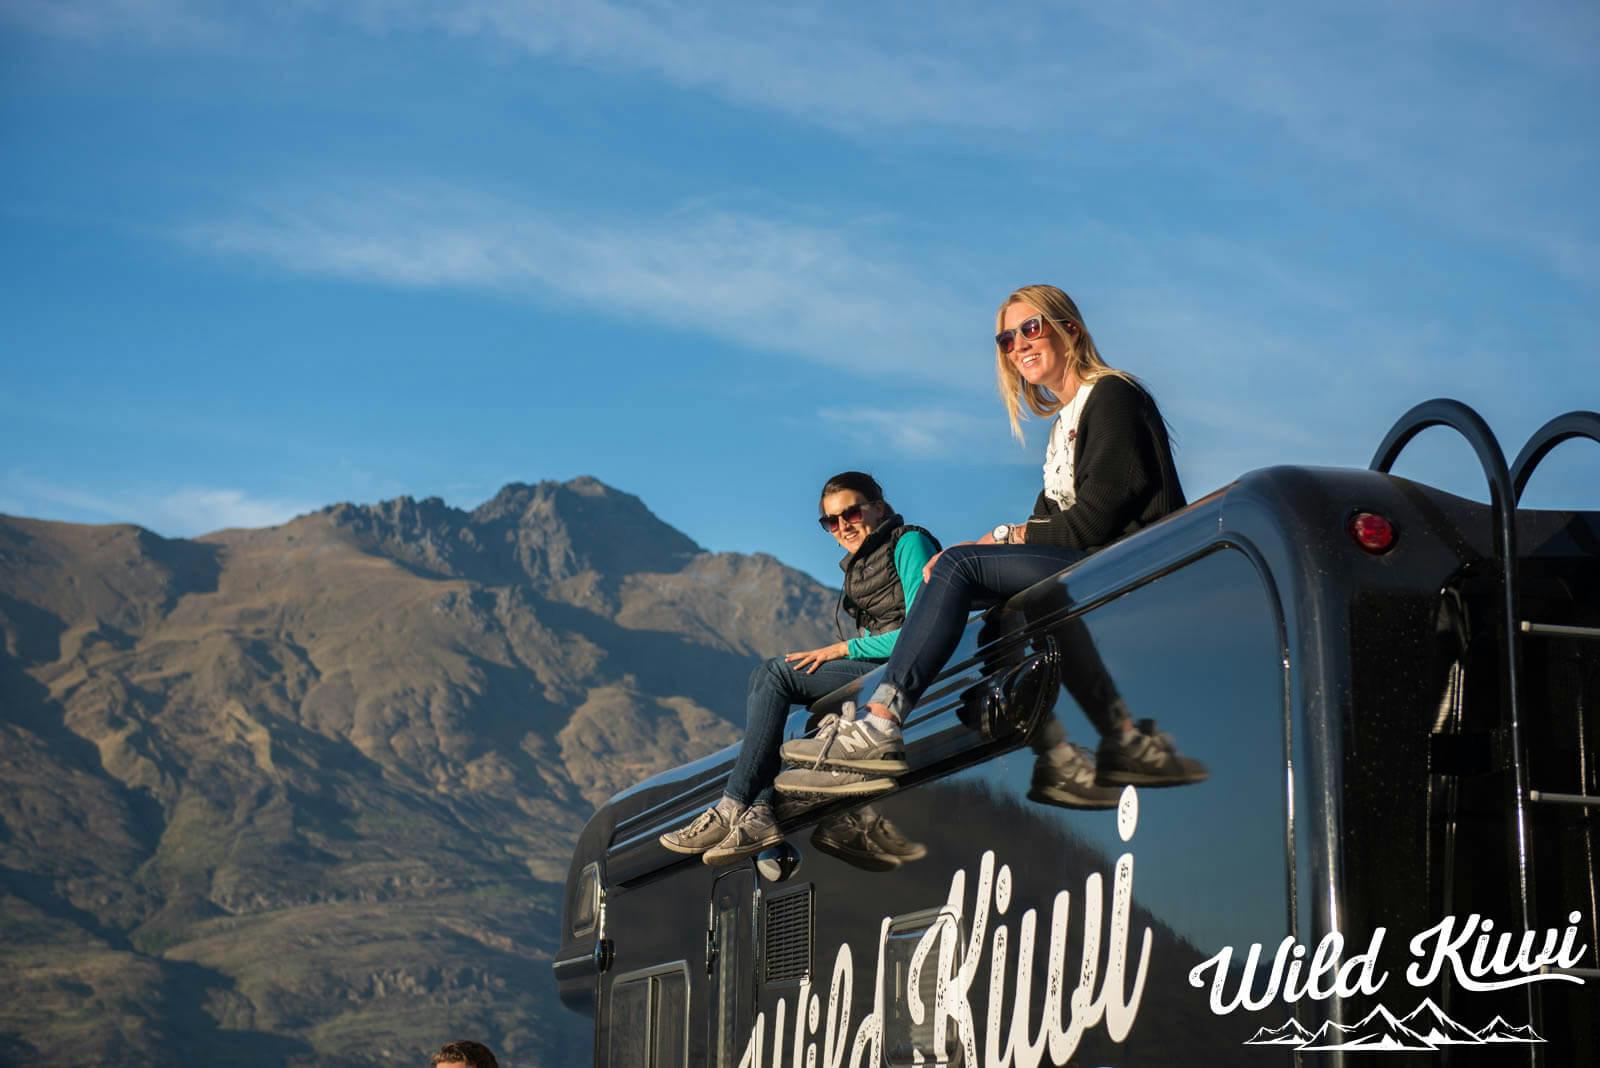 Break the cycle - Book a road trip in New Zealand and rethink your perspective on the world